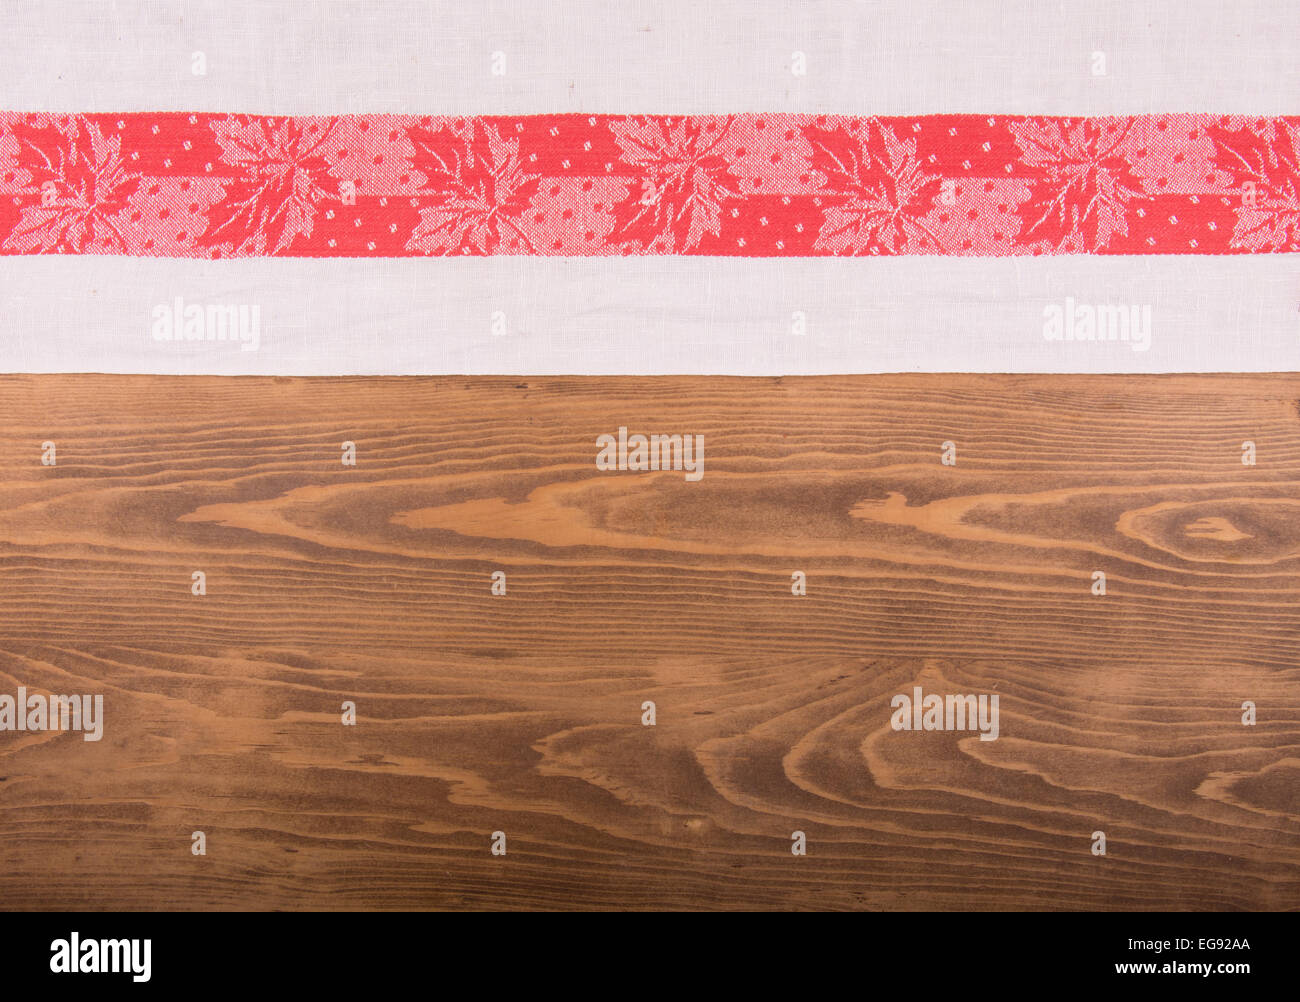 Old red and white patterned kitchen towel on dark wooden background Stock Photo